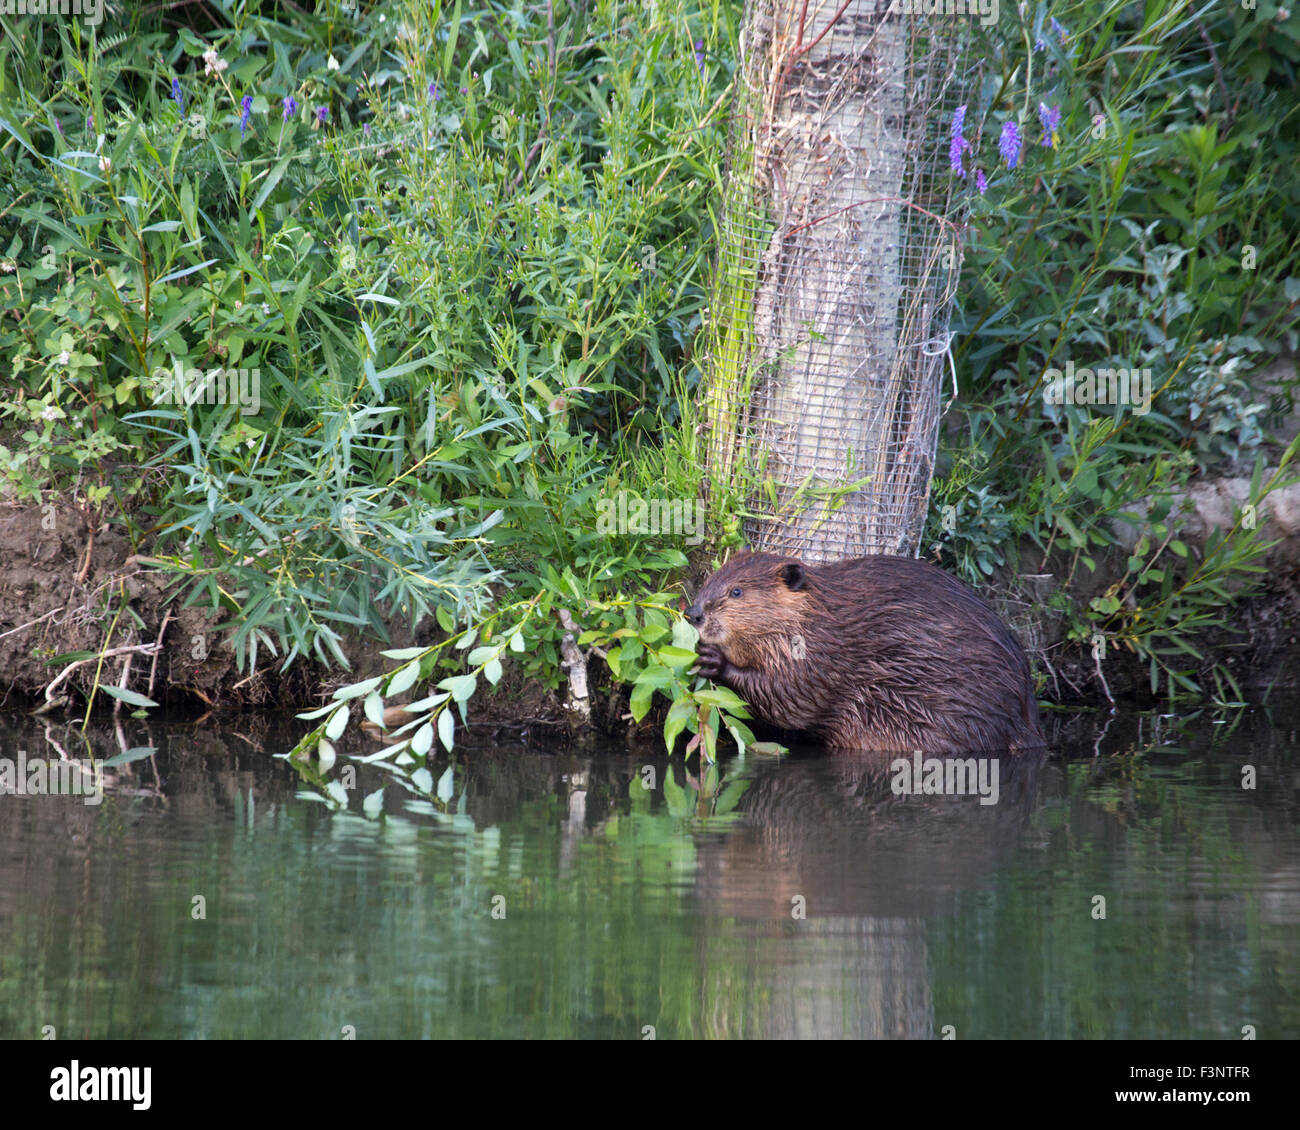 Beaver (Castor canadensis) feeding on shrub beside a Trembling Aspen tree (Populus tremuloides) wrapped in wire for protection Stock Photo